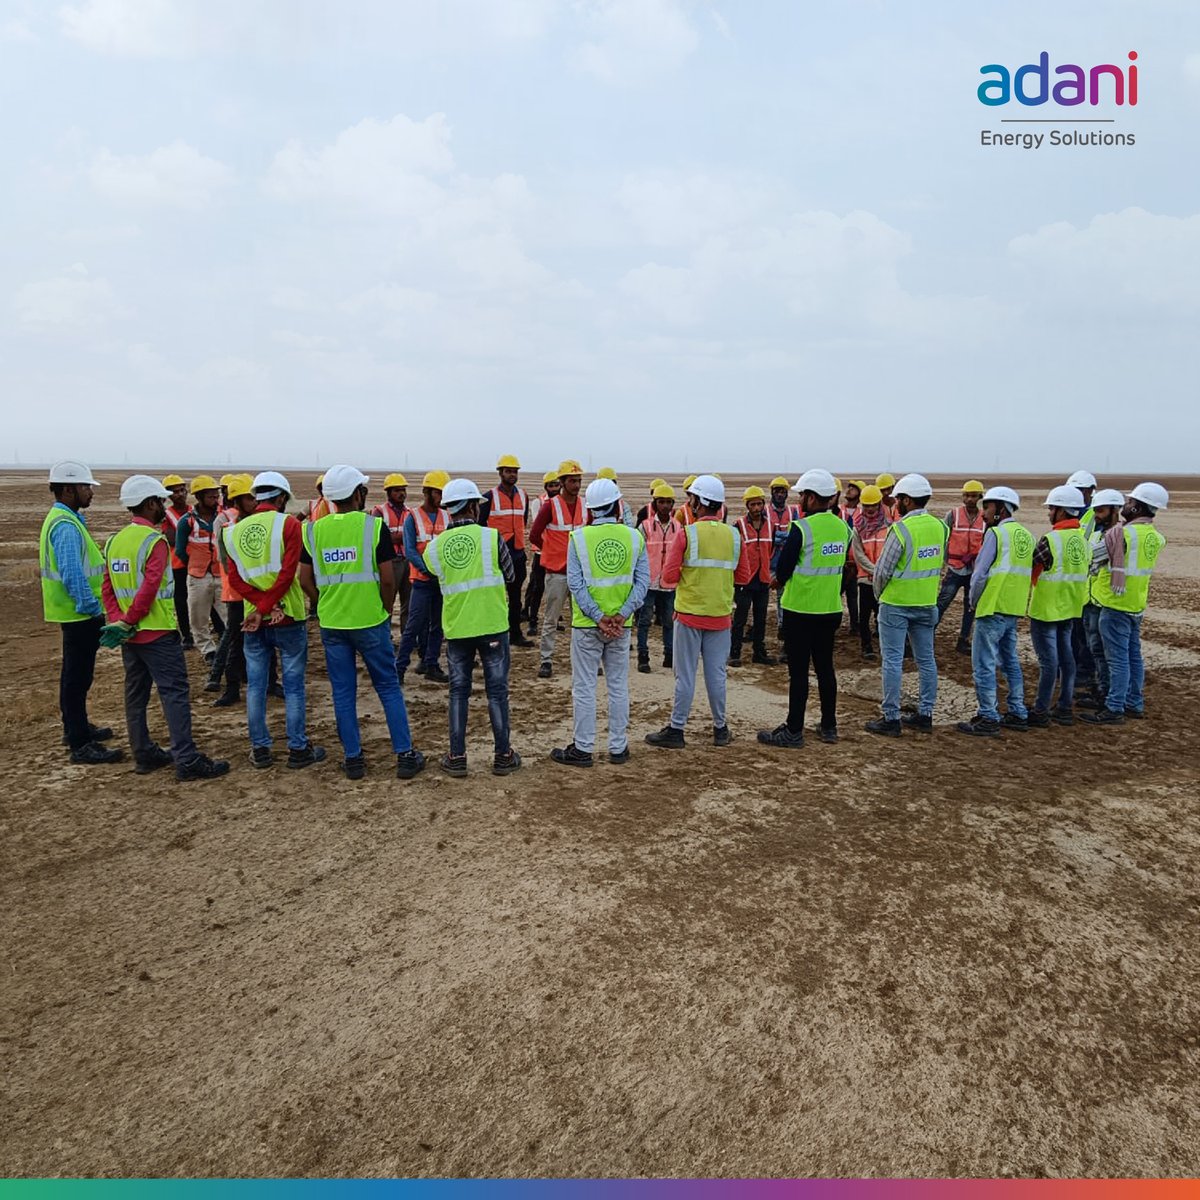 #AdaniEnergySolutions completed India's first-ever live line installation of OPGW replacement work. As we replaced 990km of OPGW in +/- 500kV HVDC lines, we followed a meticulous planning process, adhered to safety protocols, and set a new benchmark.